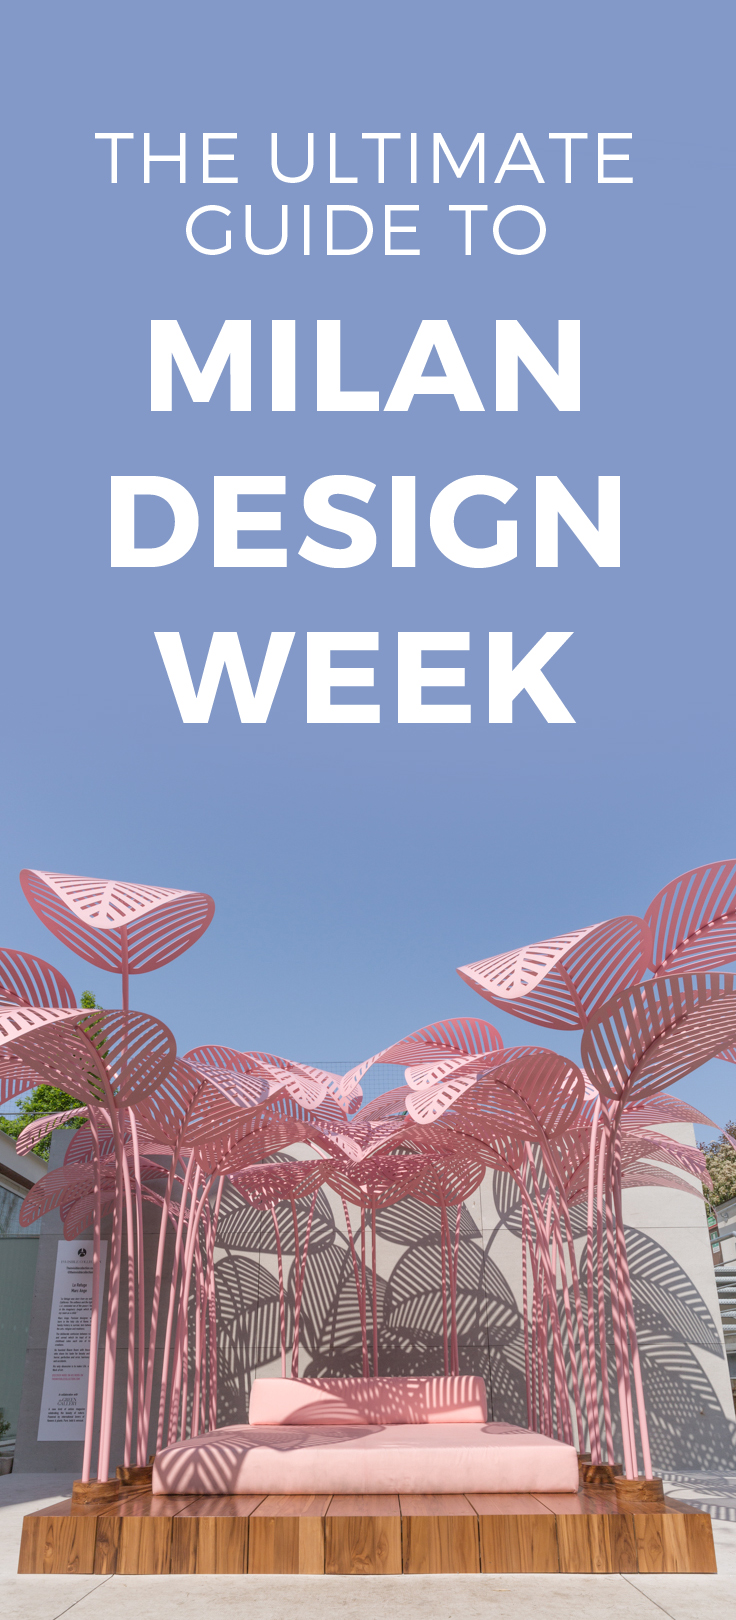 The Ultimate Guide to Milan Design Week (Especially if it's your first